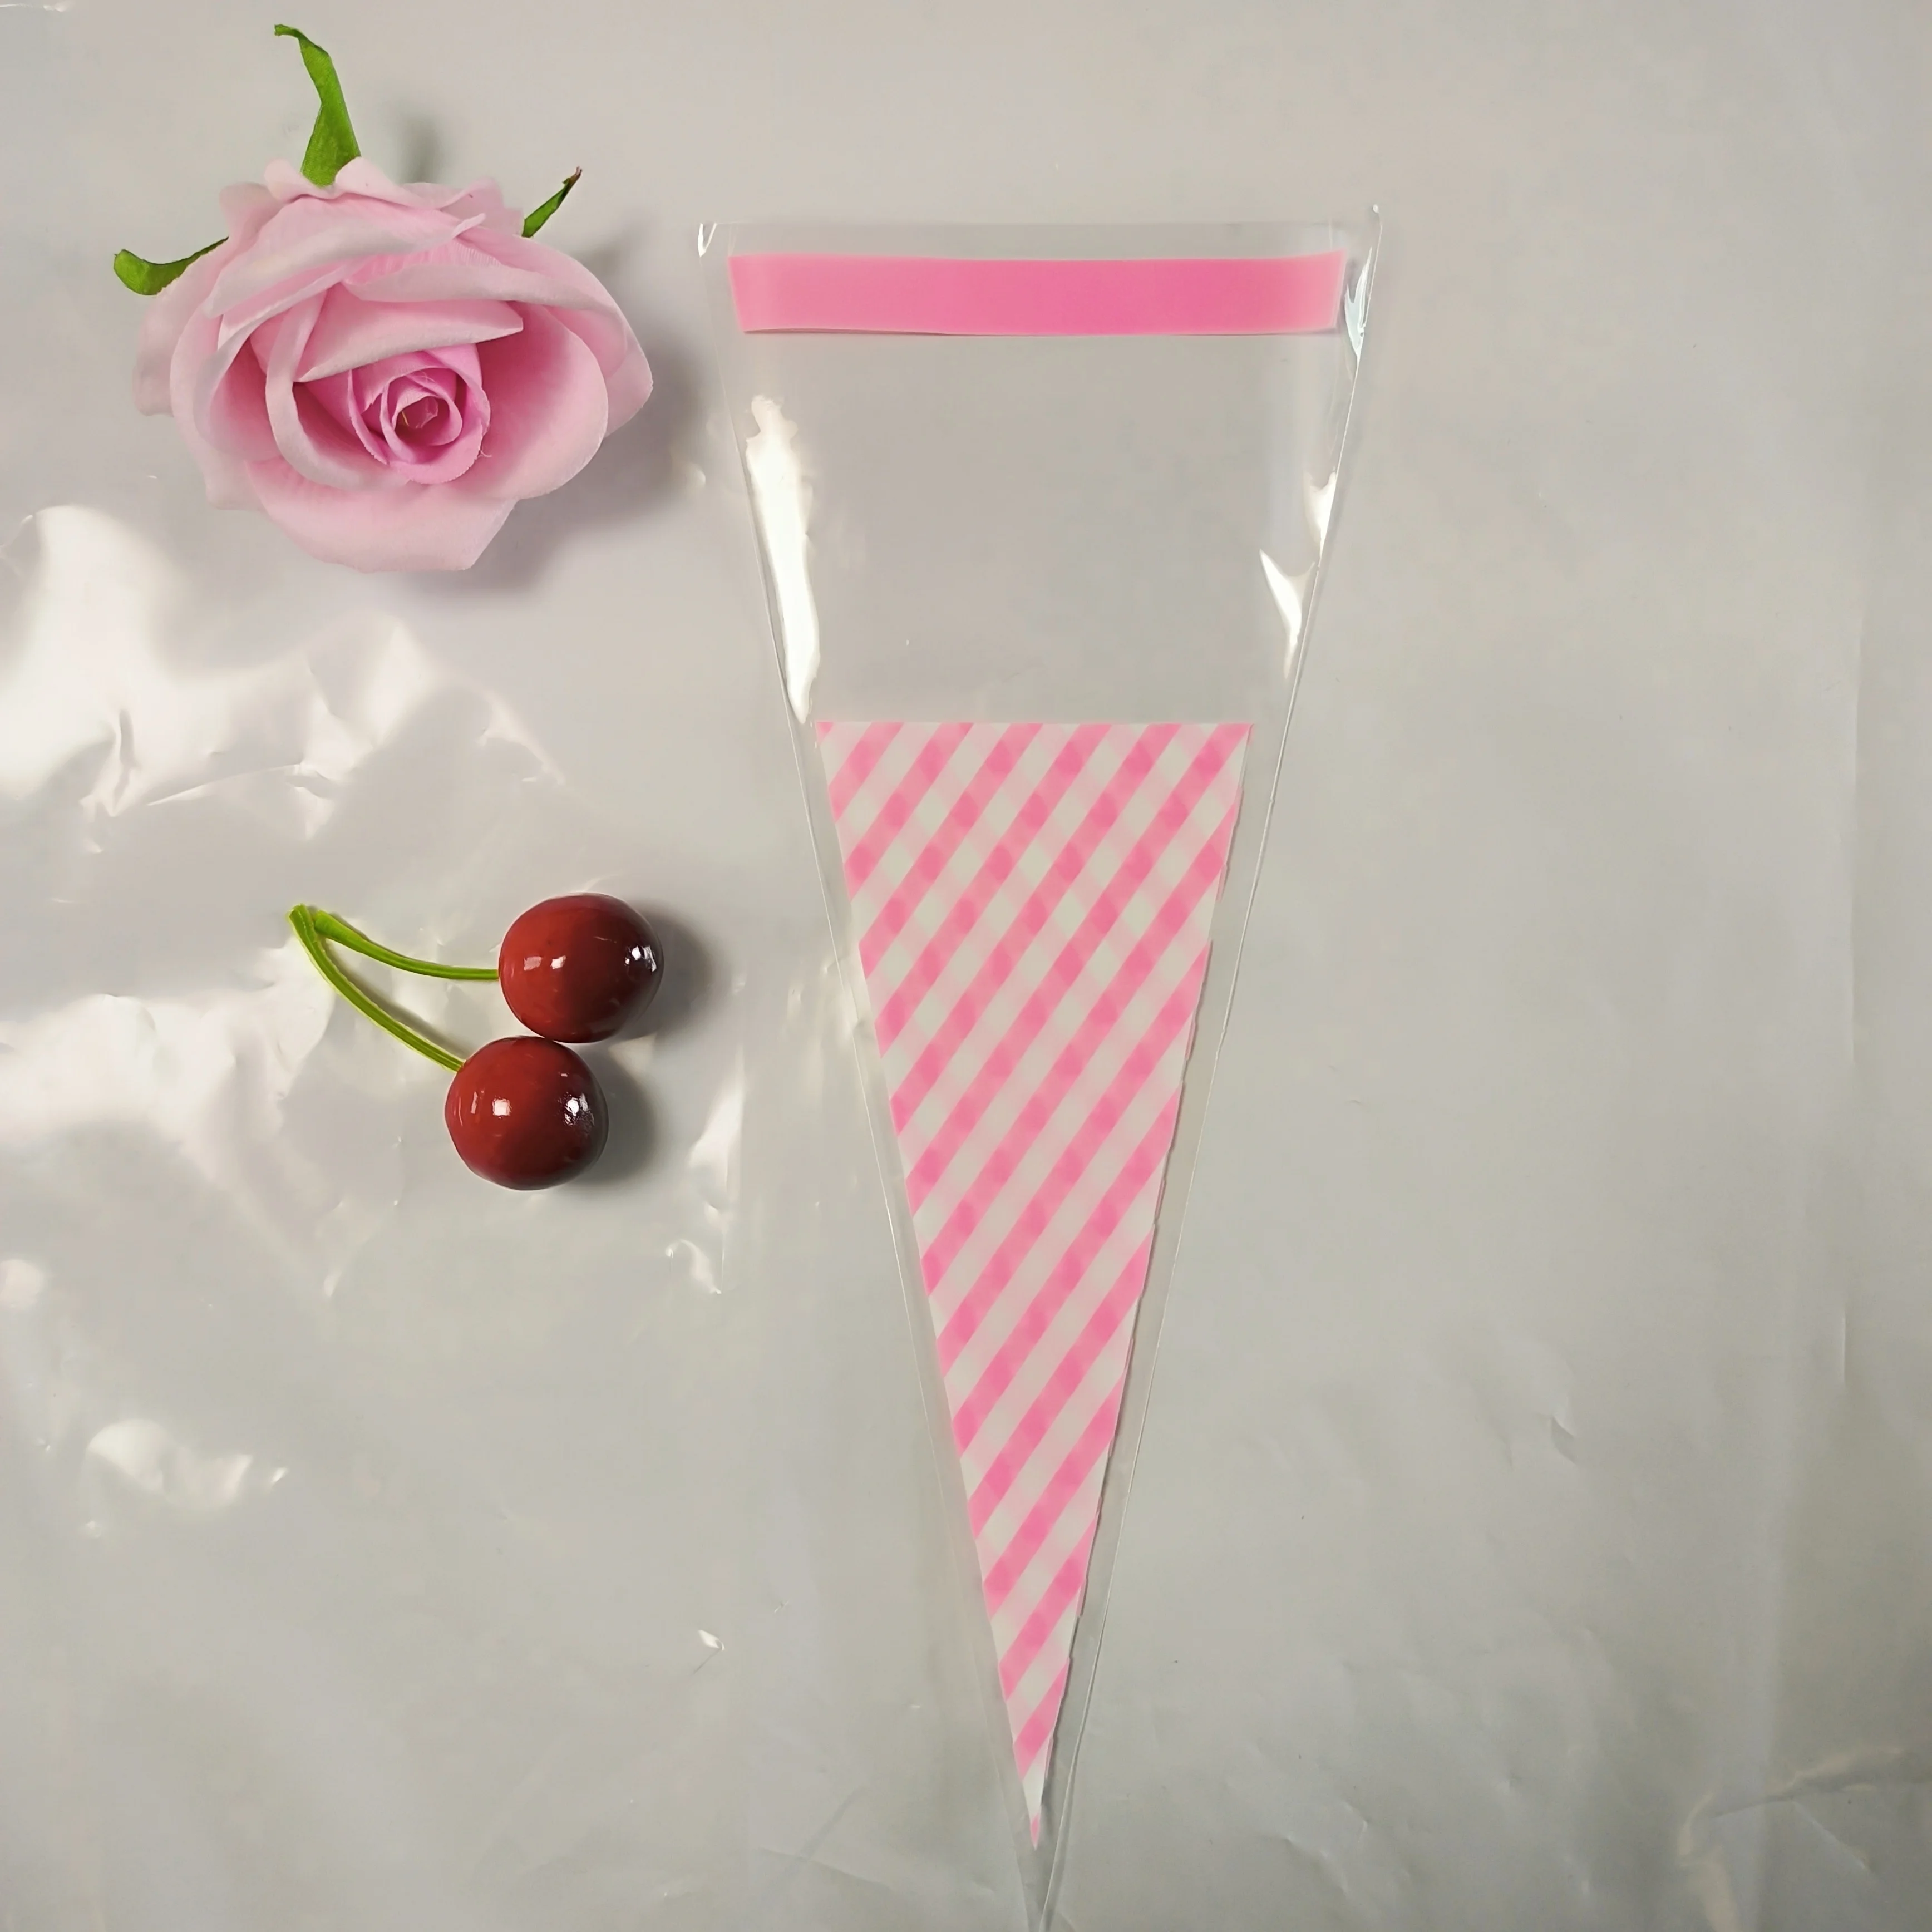 OPP Plastic Triangular Baking Food Bags For Direct Sales By Manufacturers Candy Popcorn Cream Packaging Tie Silk Bags